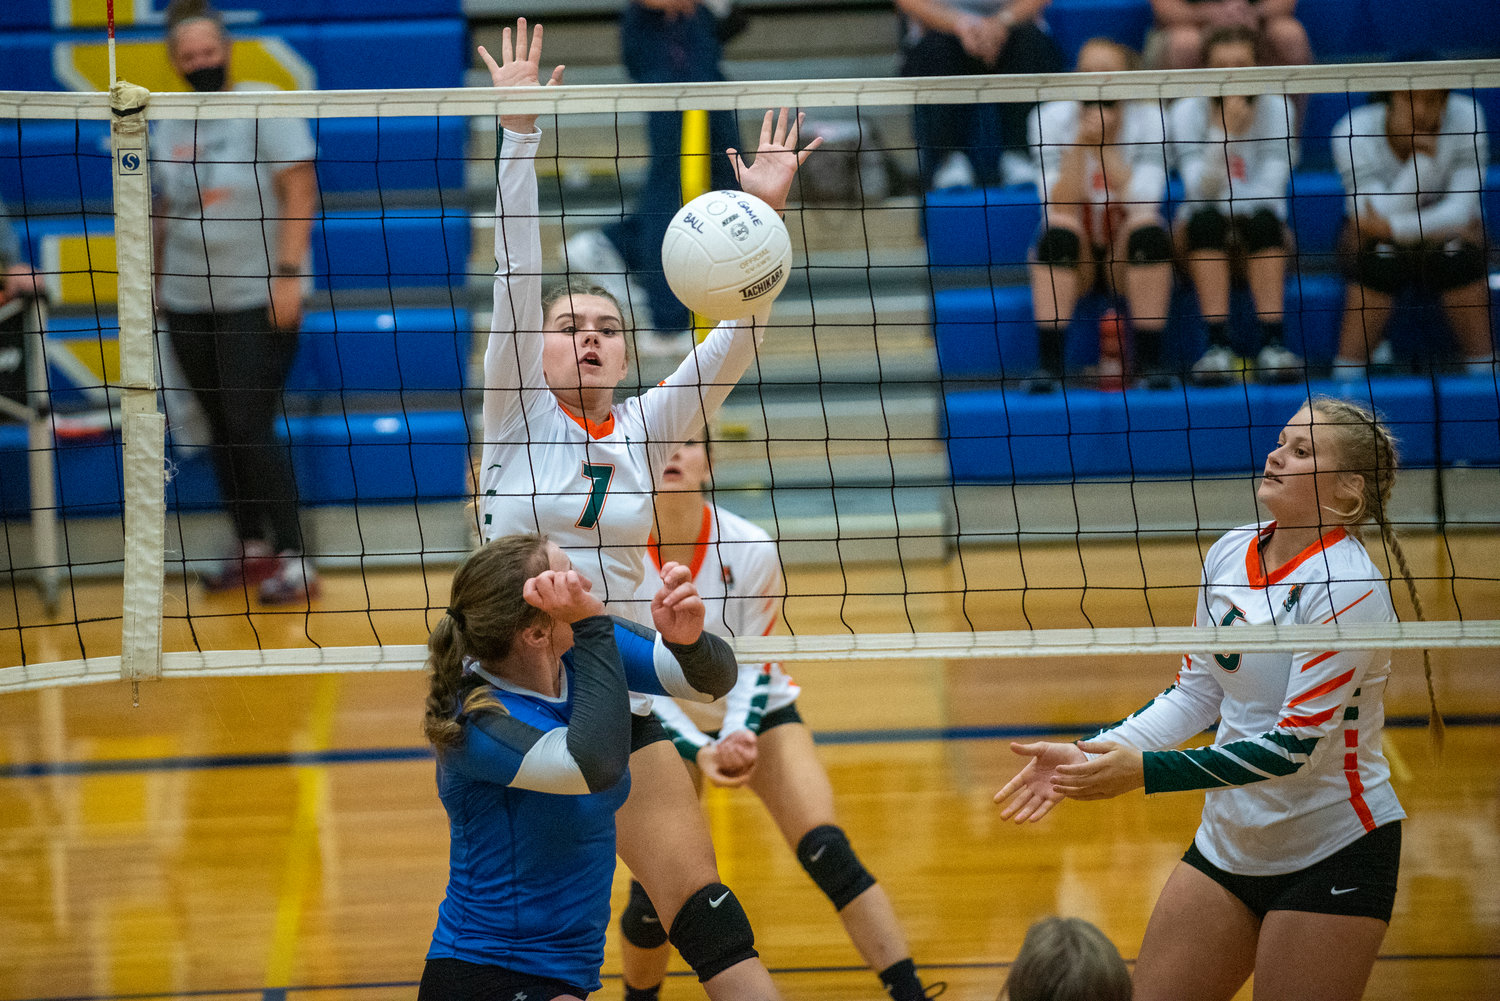 Morton-White Pass' Maddie Clevenger (7) knocks the ball over in front of Adna's JV team on Saturday.